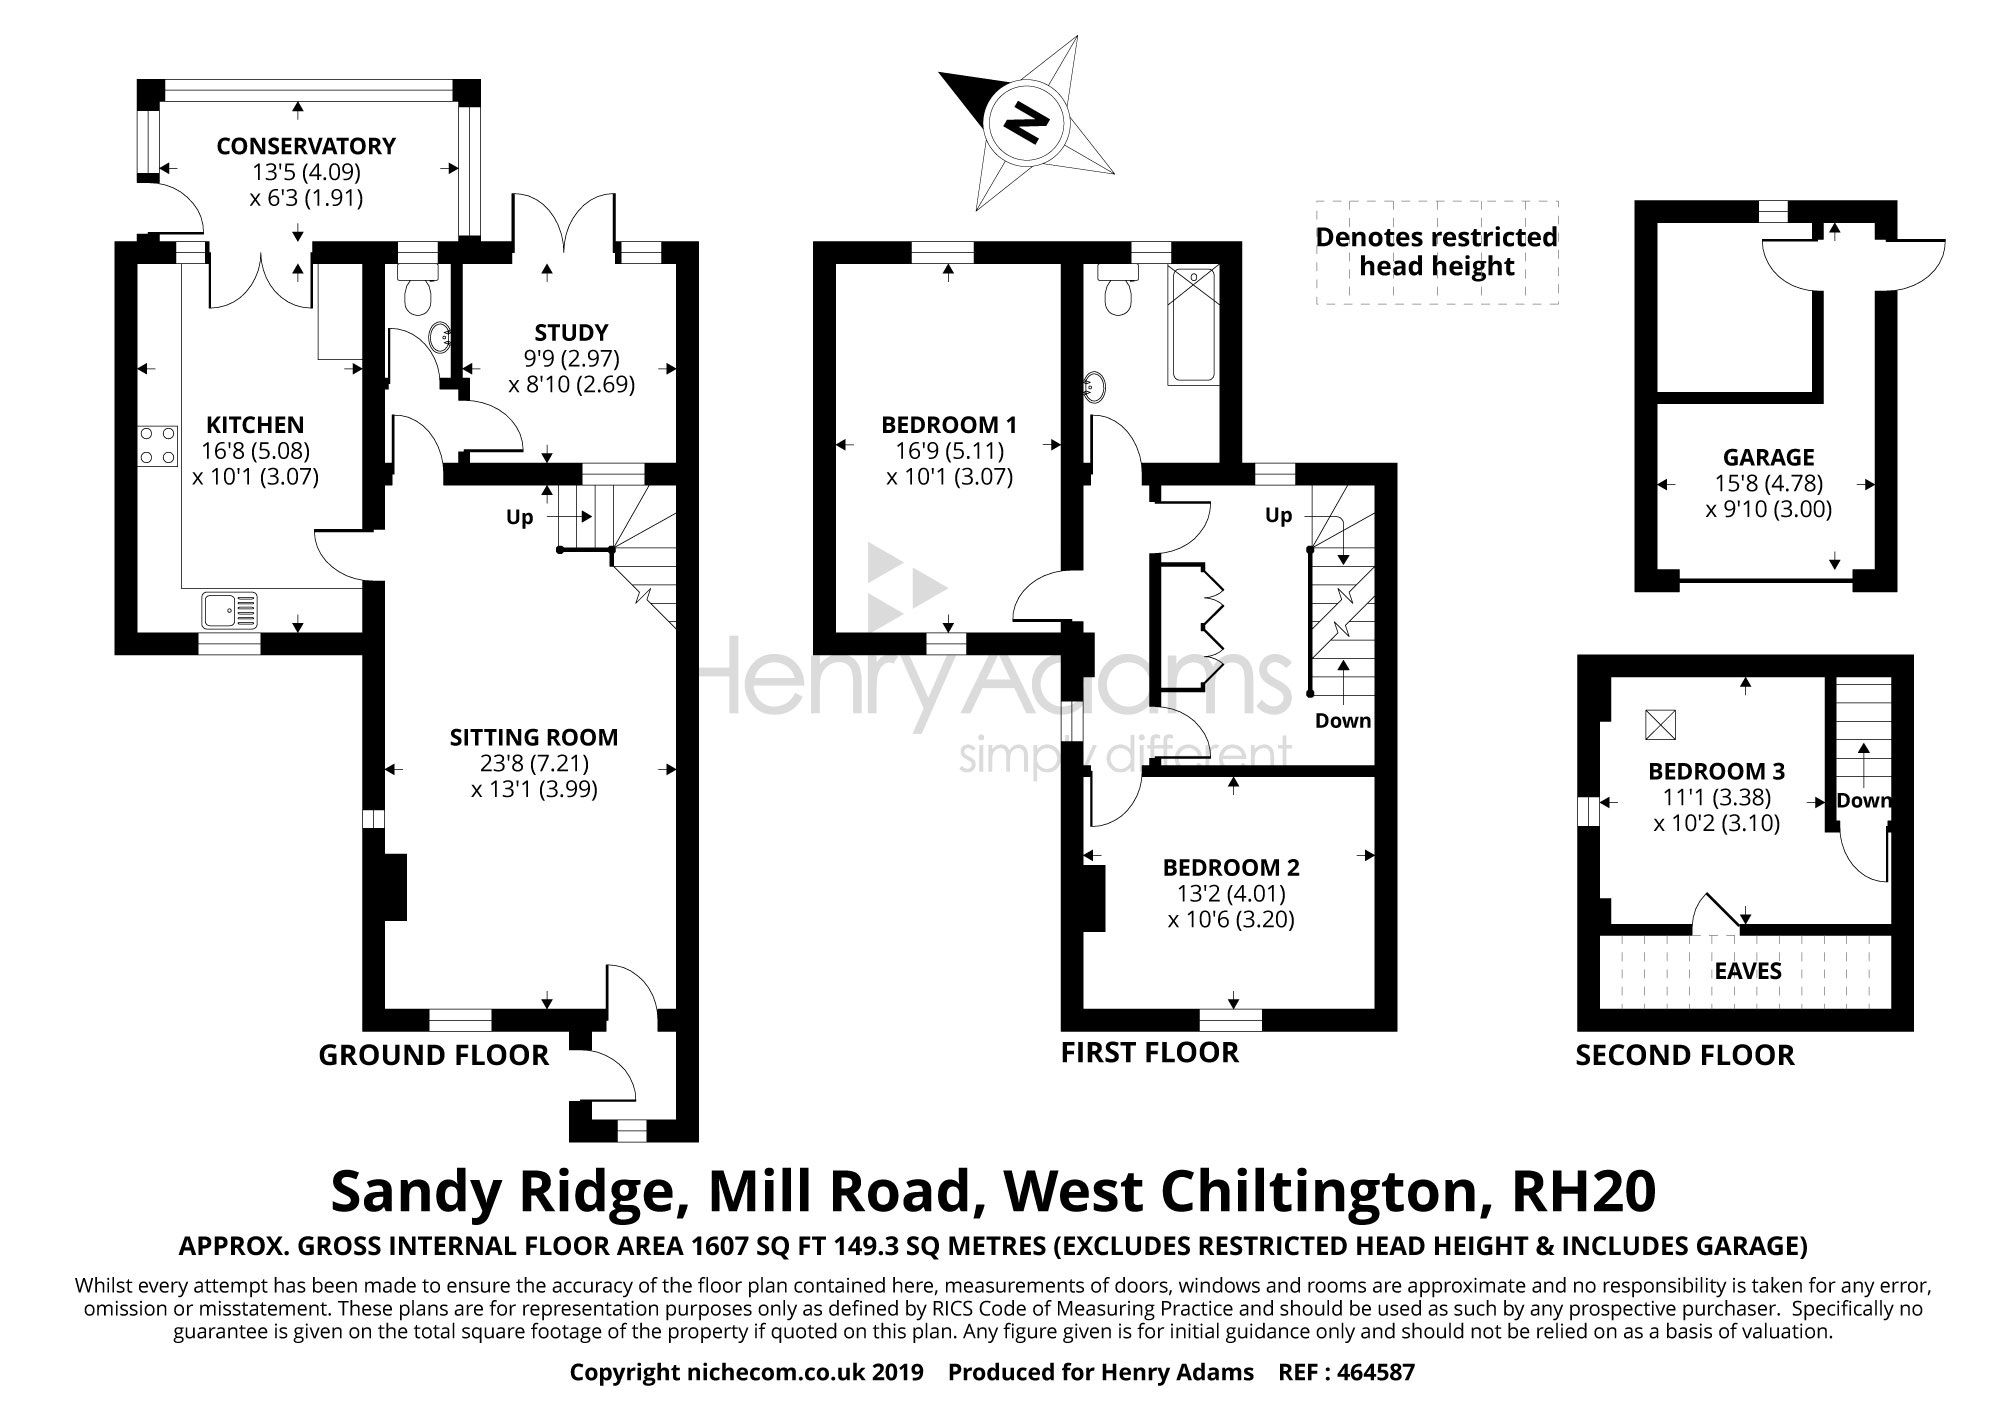 3 Bedrooms Semi-detached house for sale in Mill Road, West Chiltington RH20